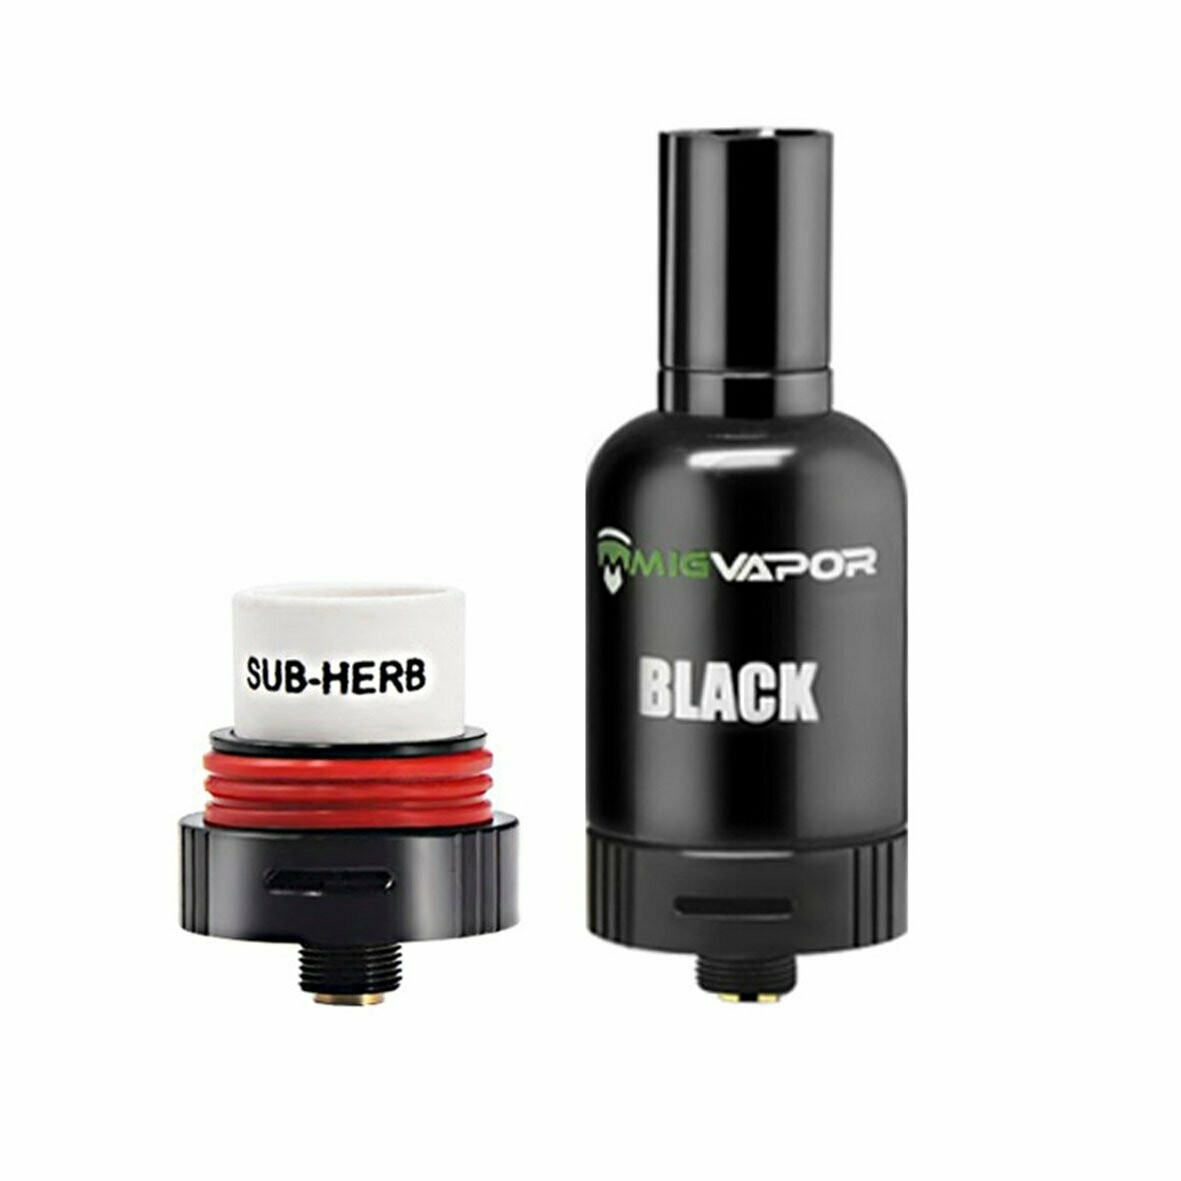 Mig Vapor Black Sub-herb Dry Herb And Concentrate Attachment